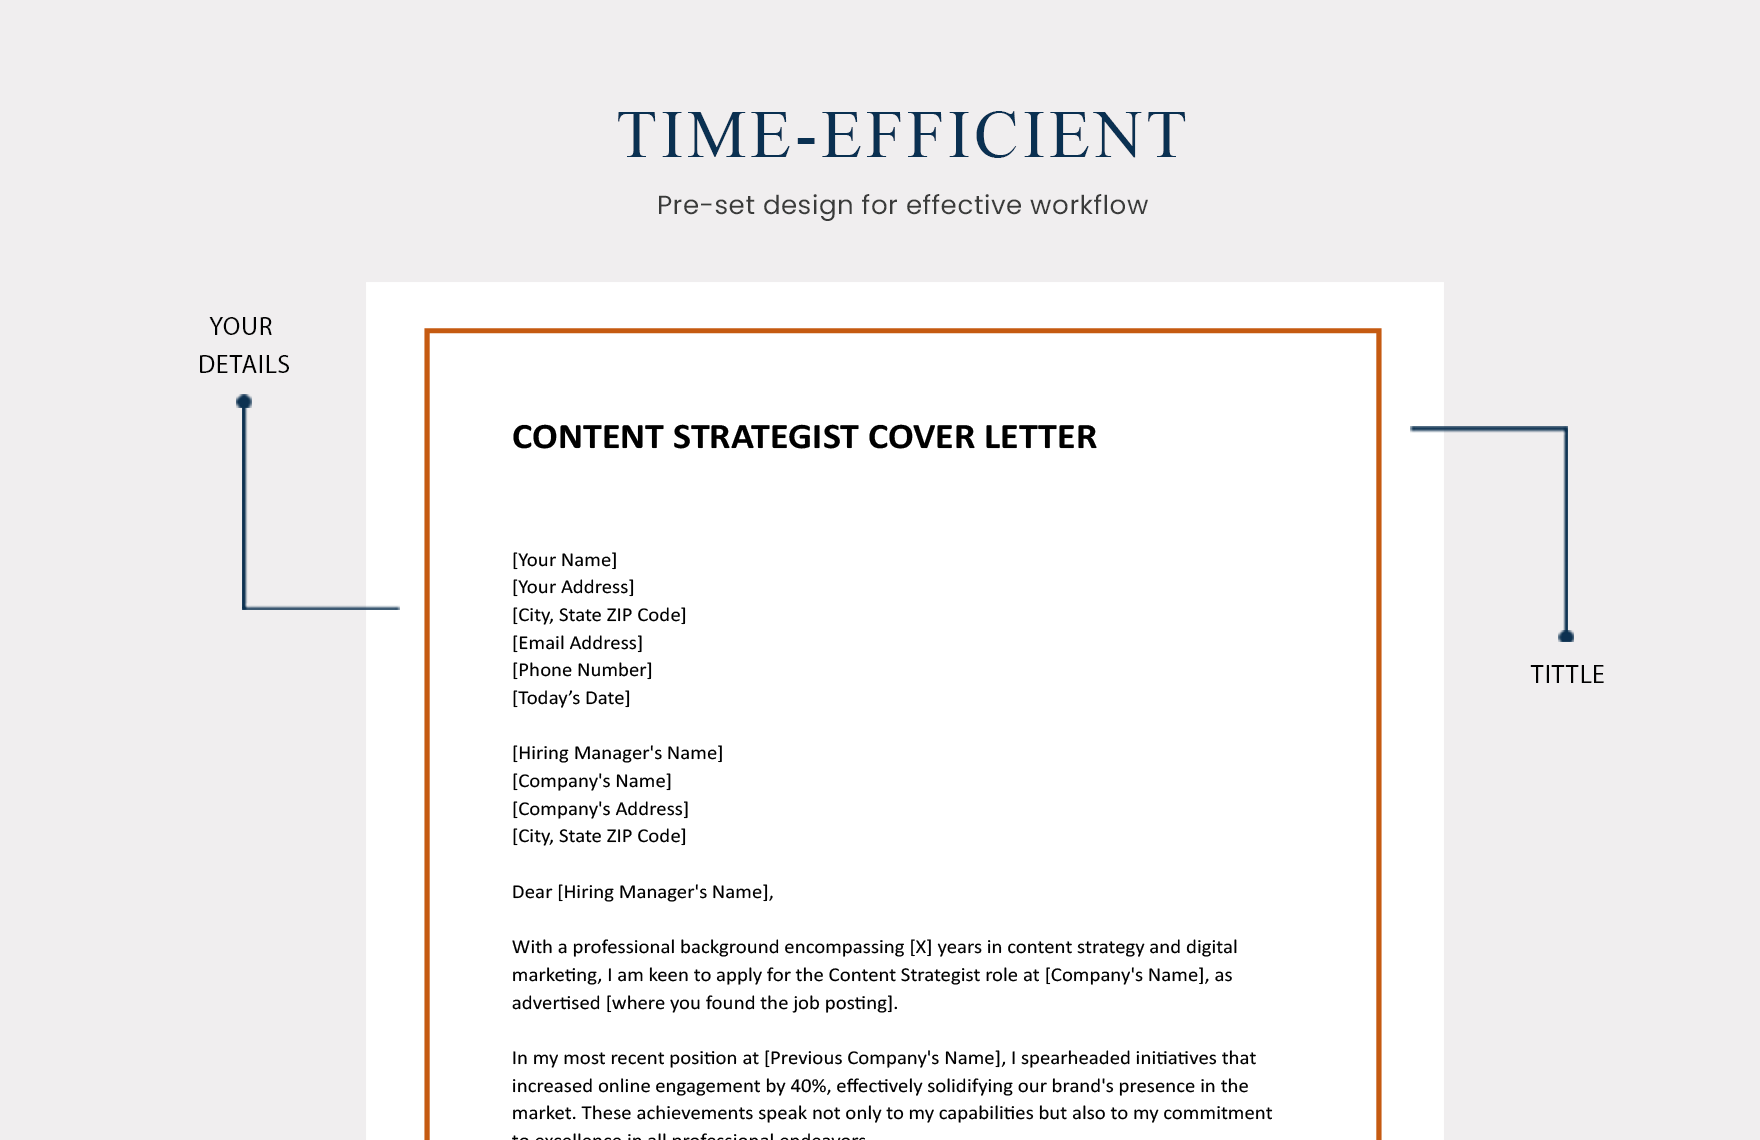 Content Strategist Cover Letter